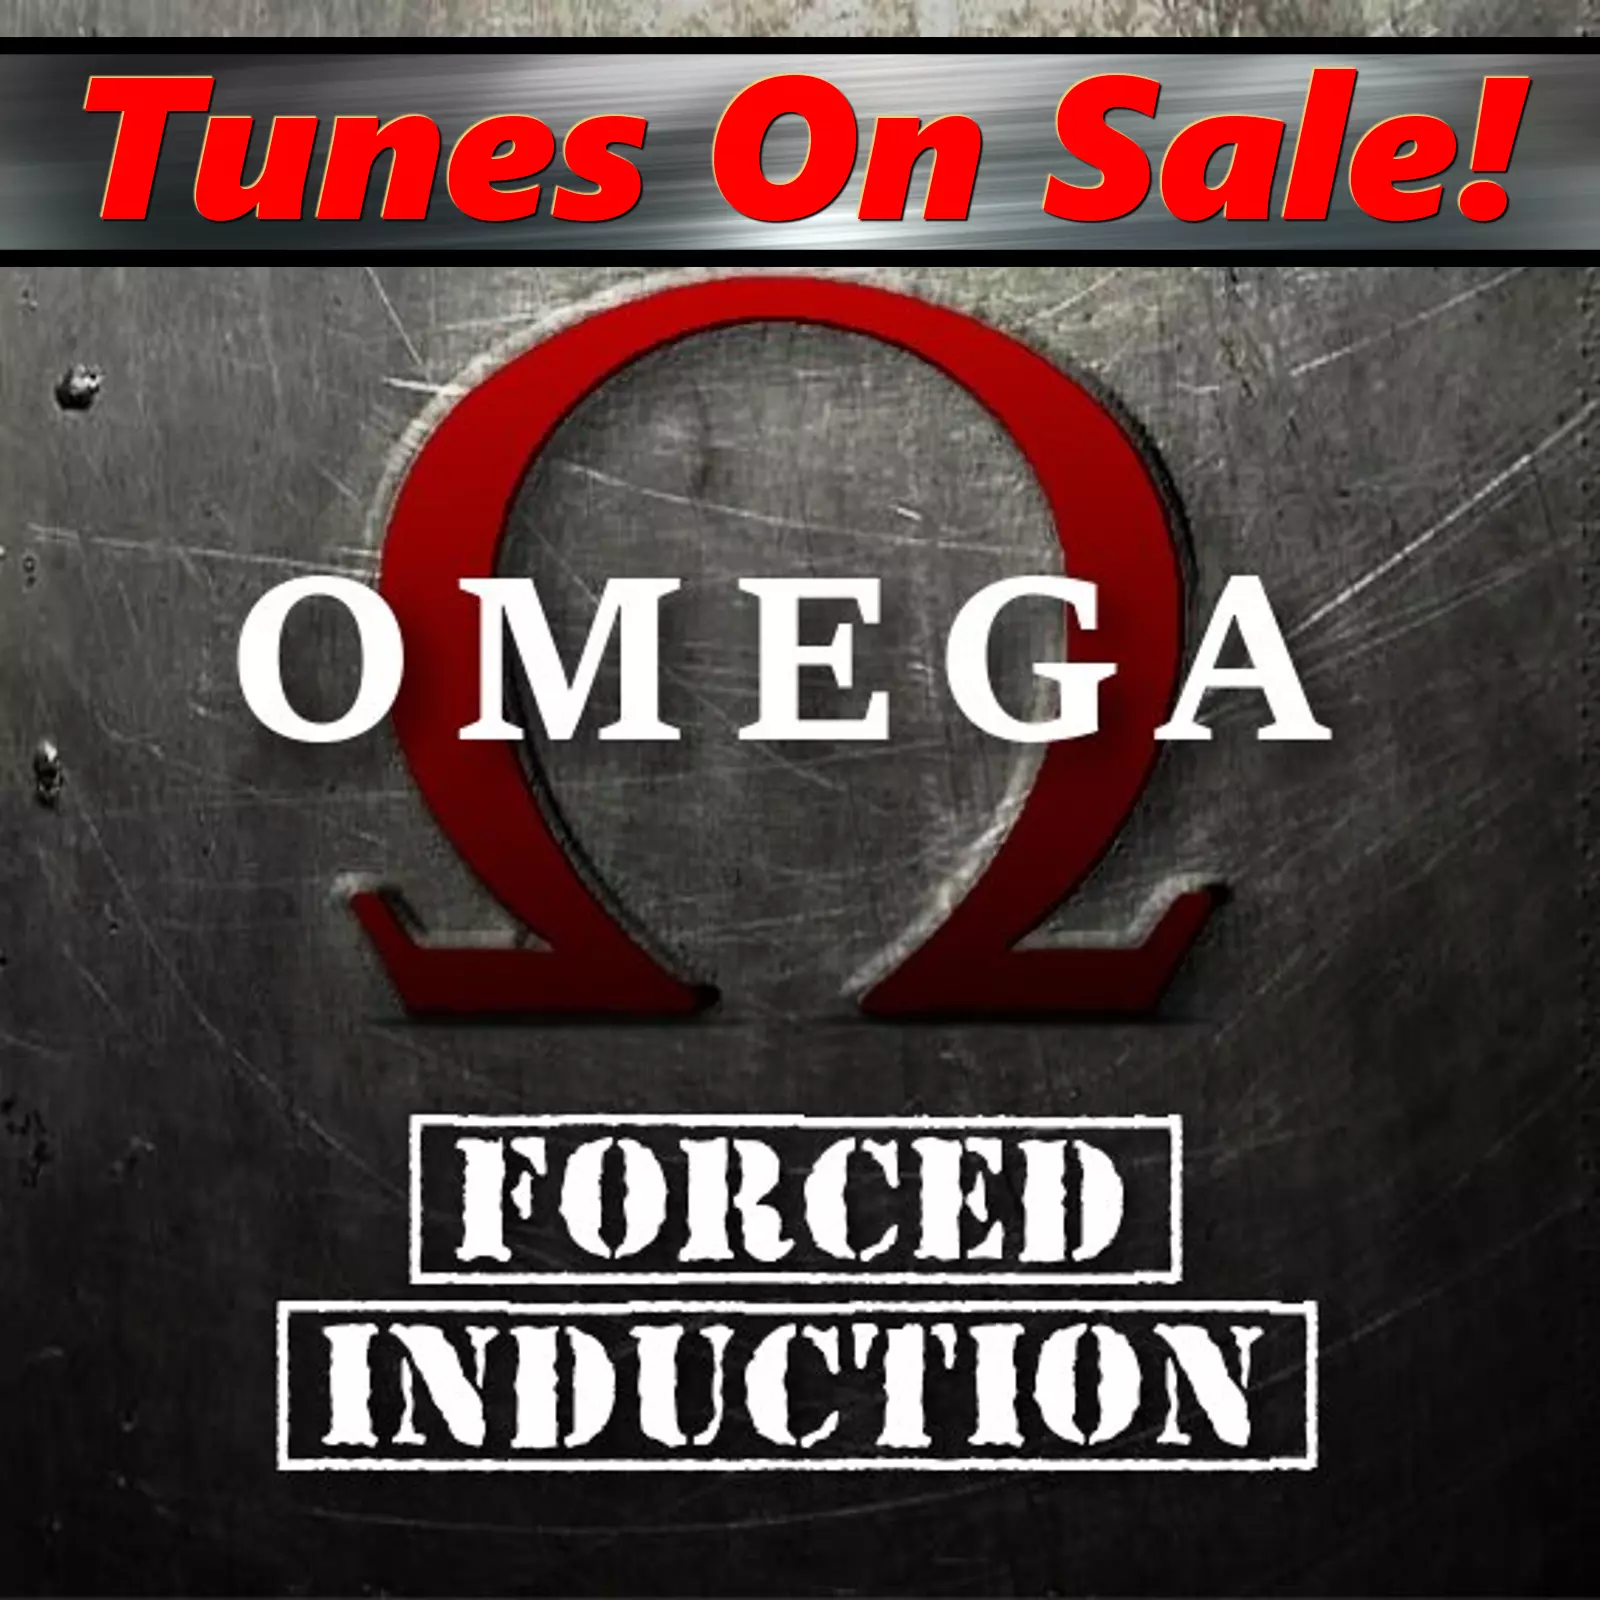 Omega Forced Induction sale